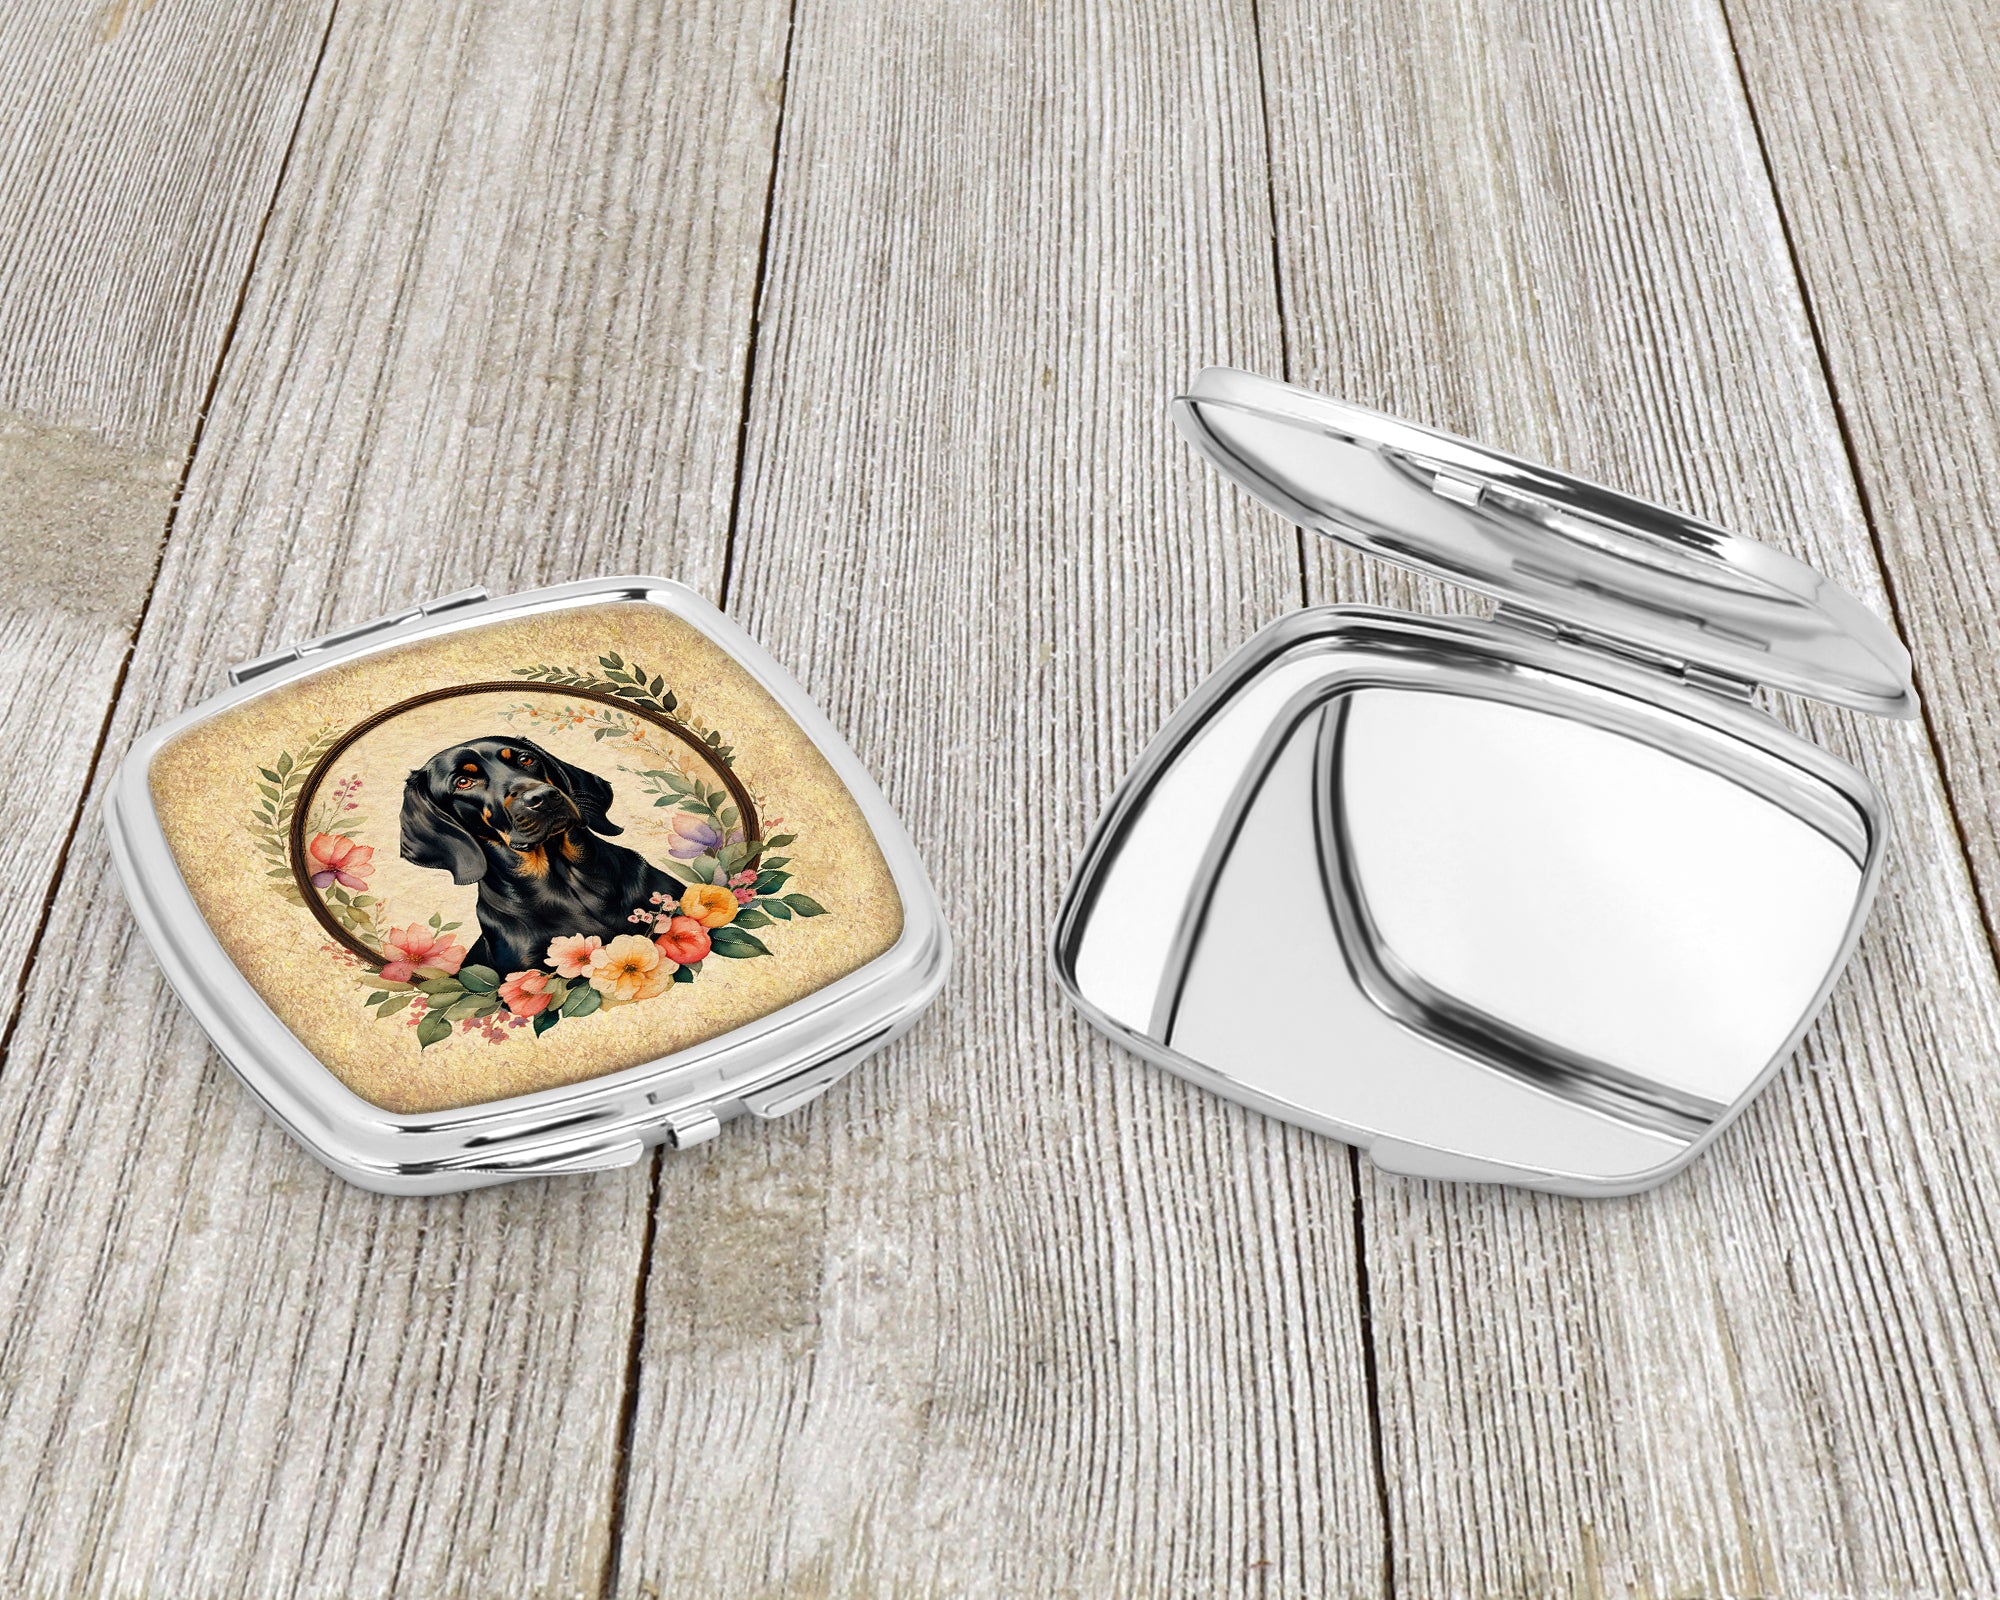 Black and Tan Coonhound and Flowers Compact Mirror